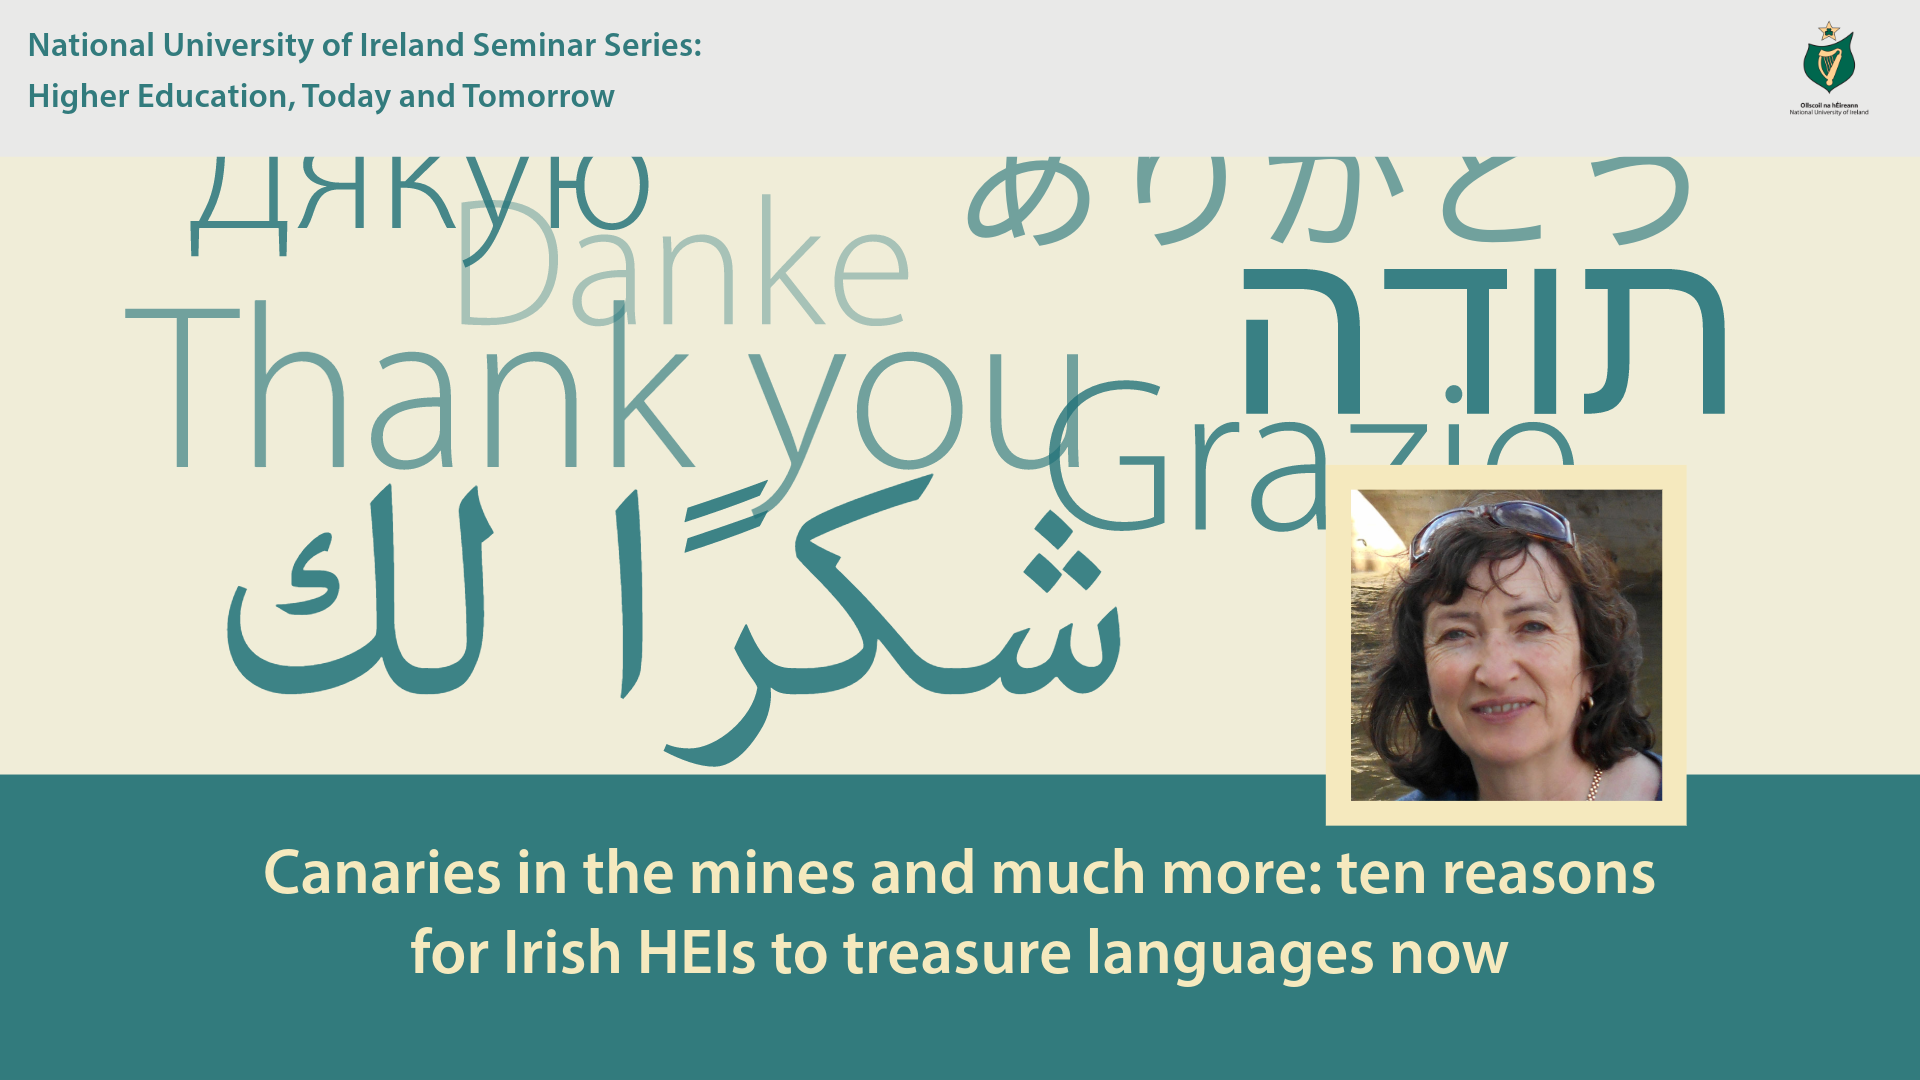 Canaries in the Mines and Much More: Ten Reasons for Irish HEIs to Treasure Languages Now